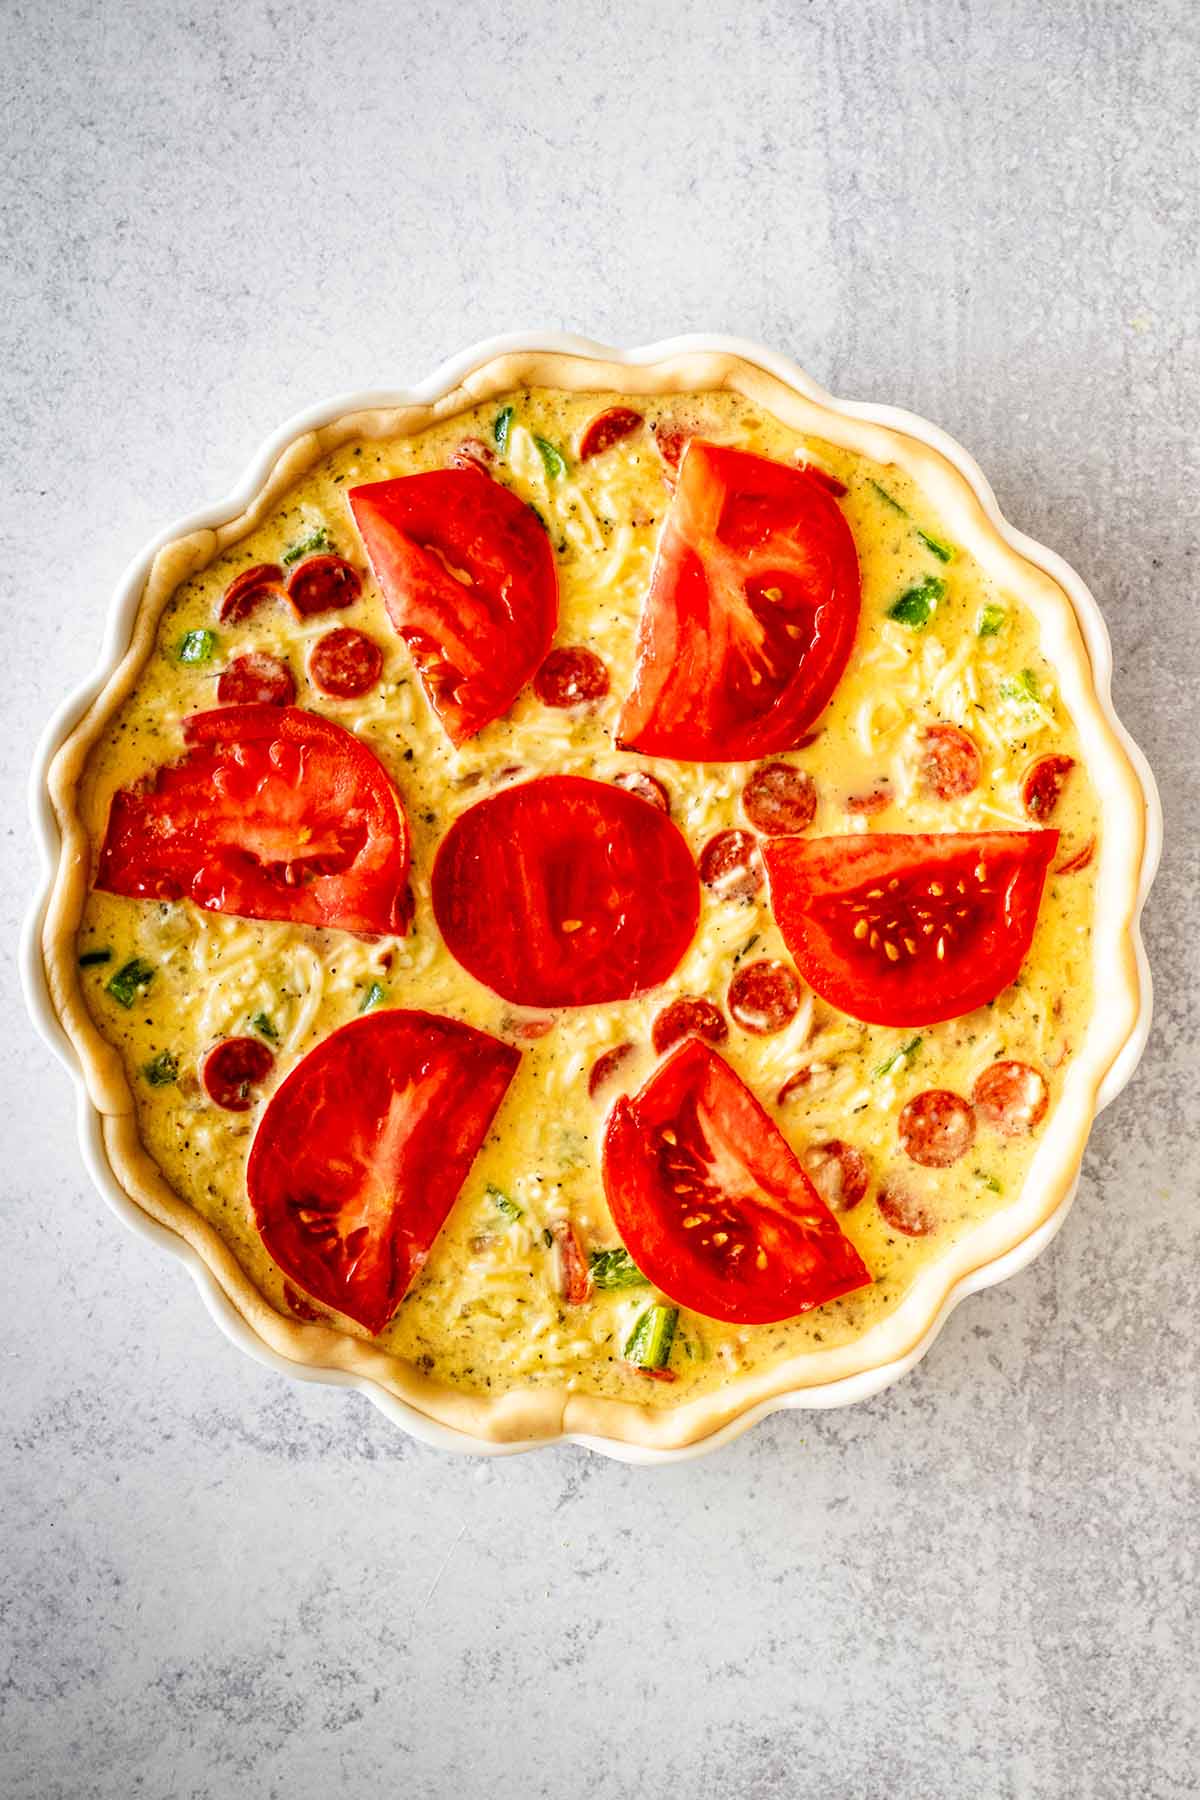 Unbaked Italian quiche topped with sliced tomatoes in a white quiche dish.